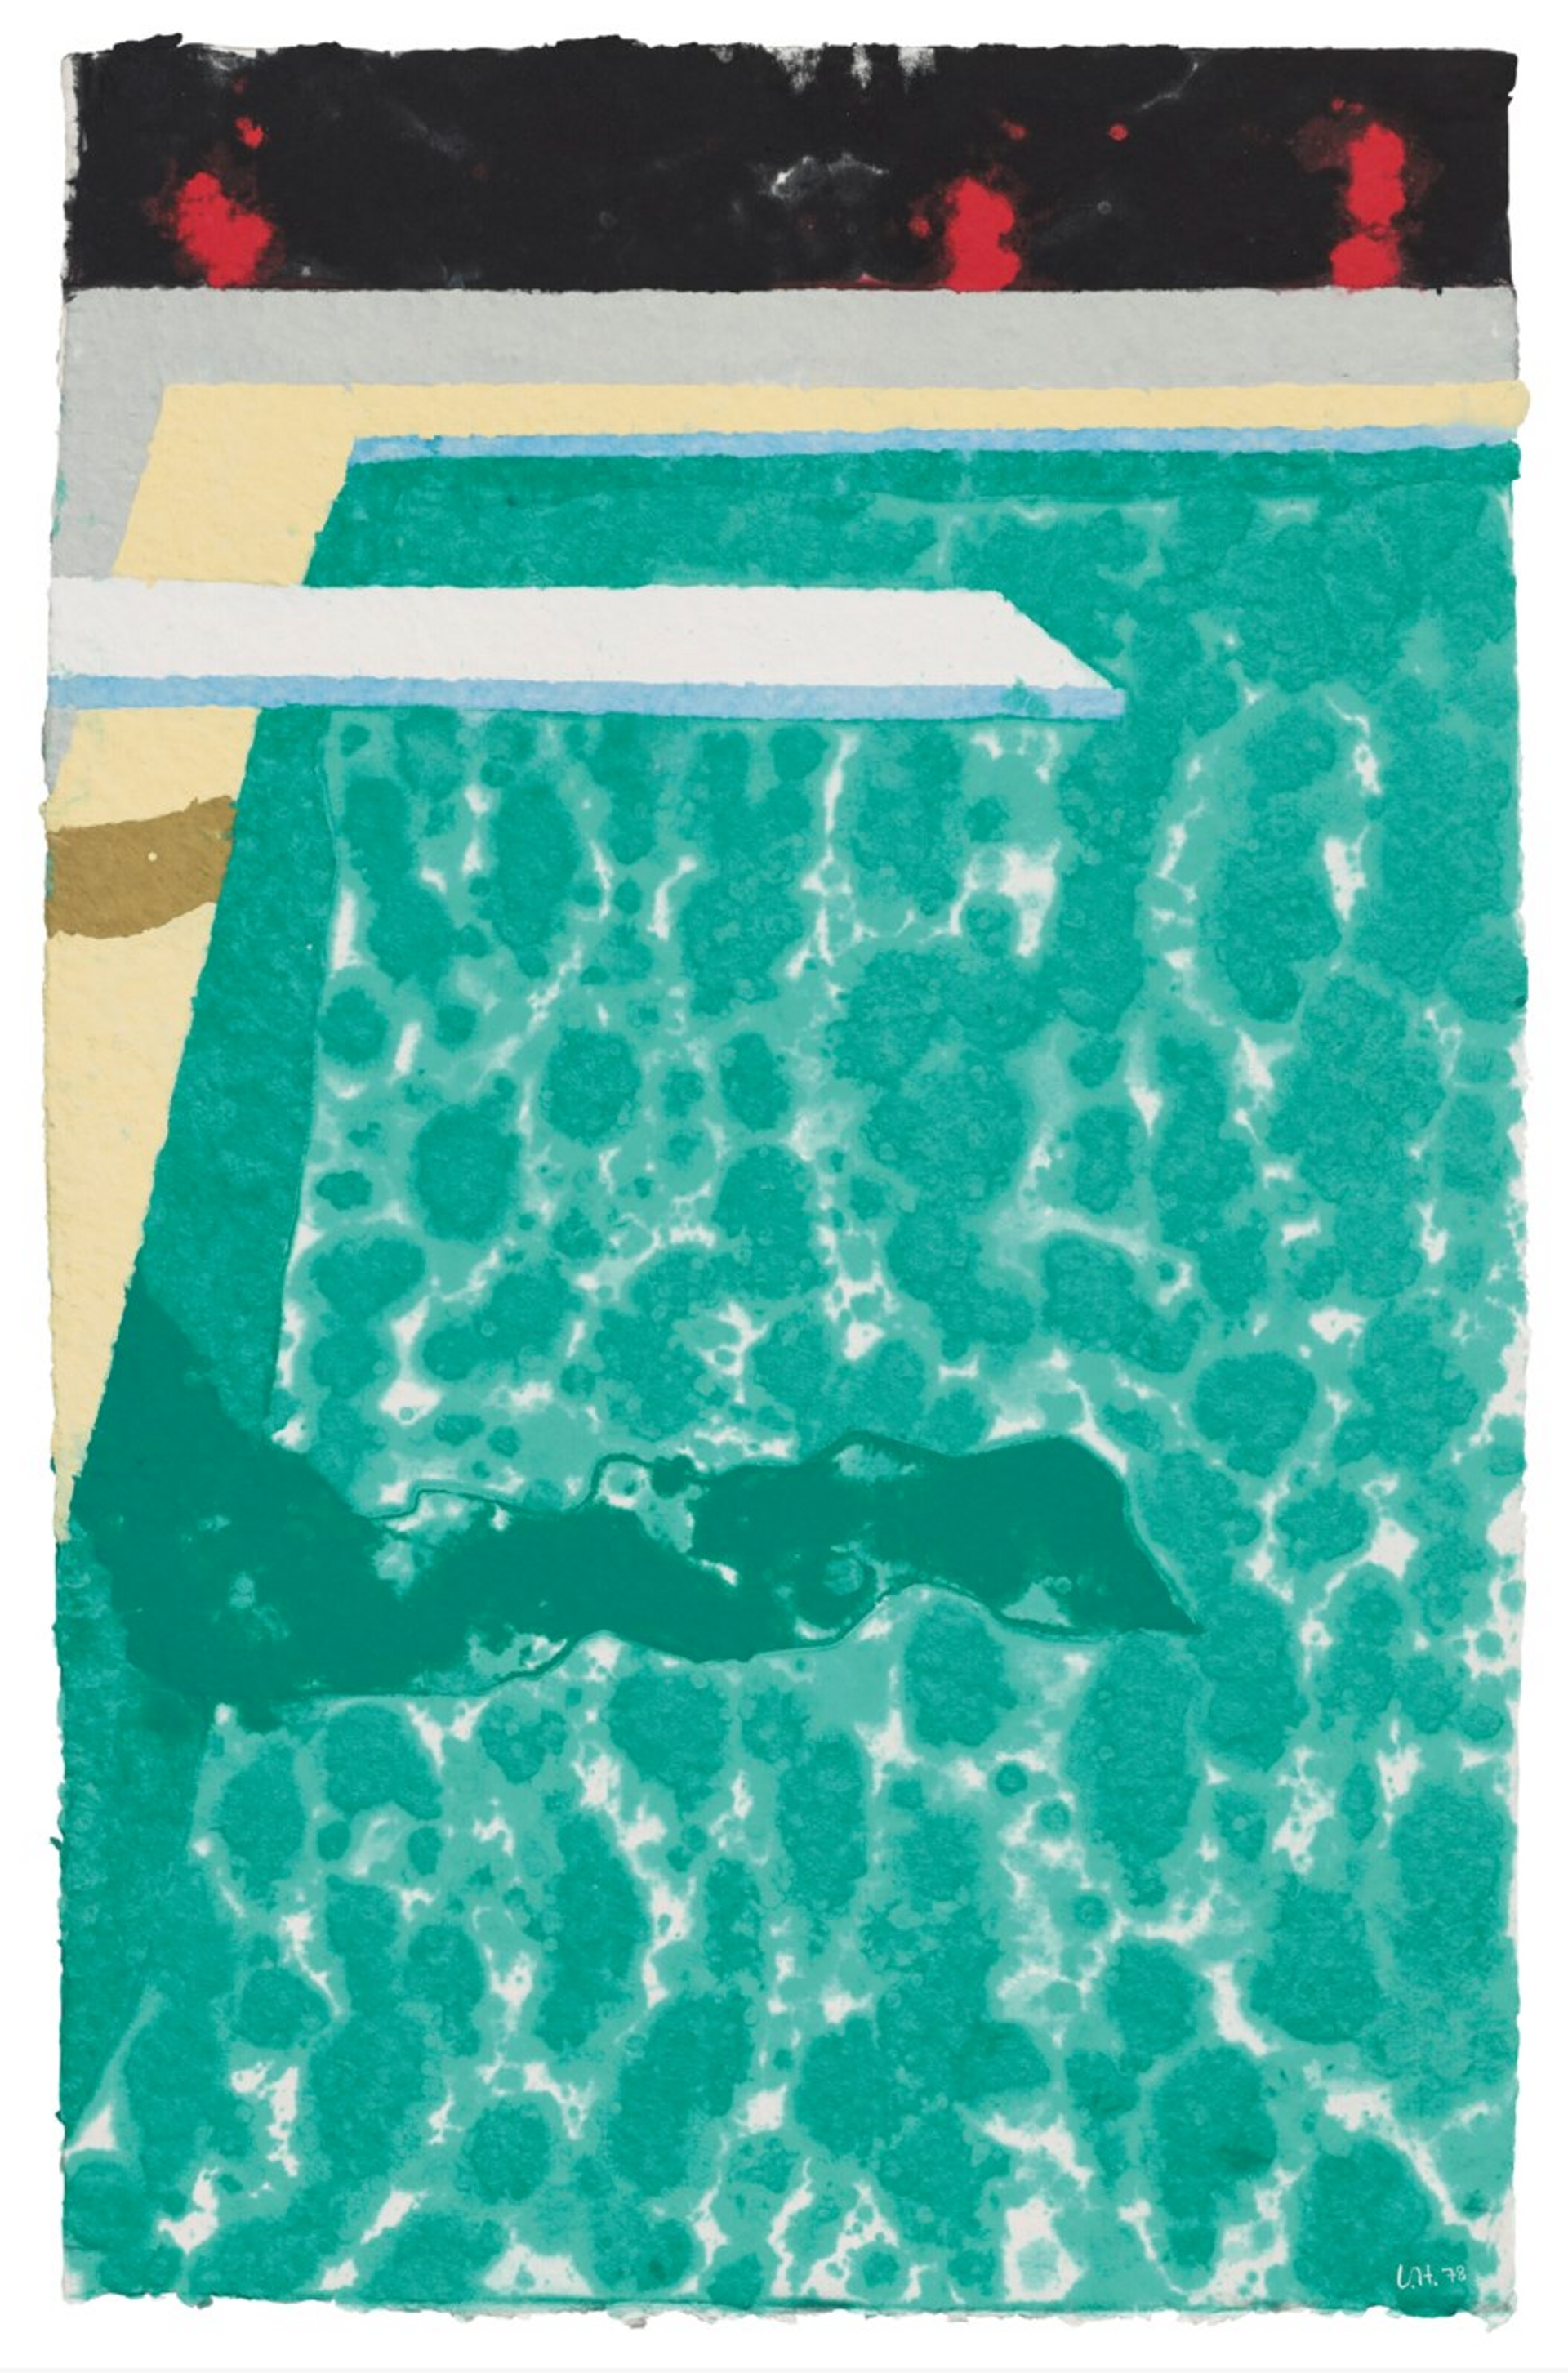 A pressed paper pulp work by David Hockney depicting a green swimming pool and white diving board which stretches into the centre of the composition.